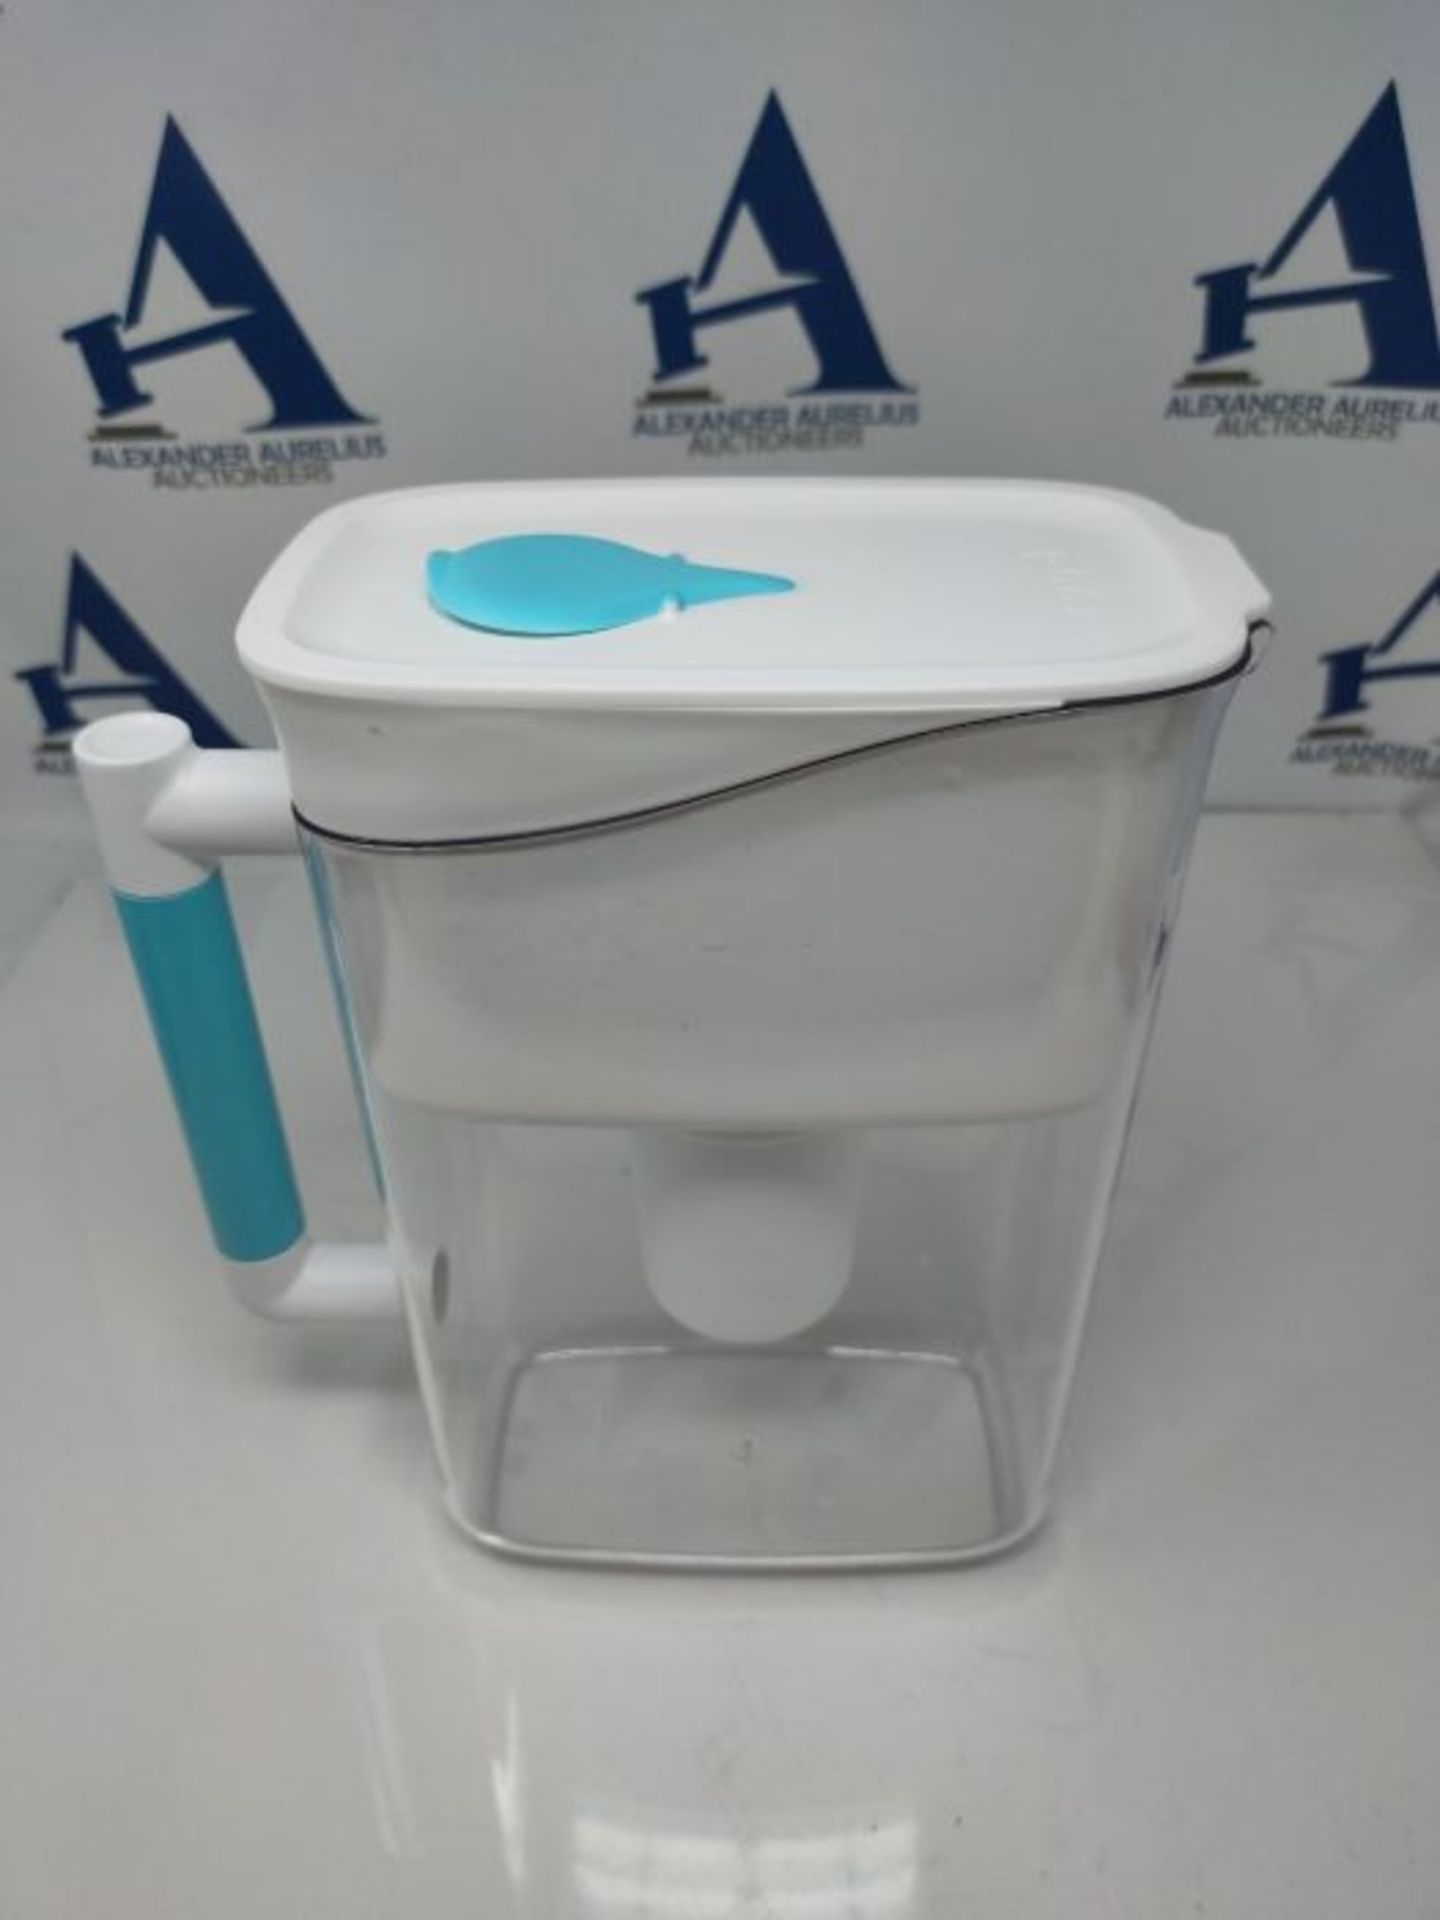 Phox Wave 2.8L Water Filter Jug and Refillable Cartridge (Alkaline) - Image 2 of 3